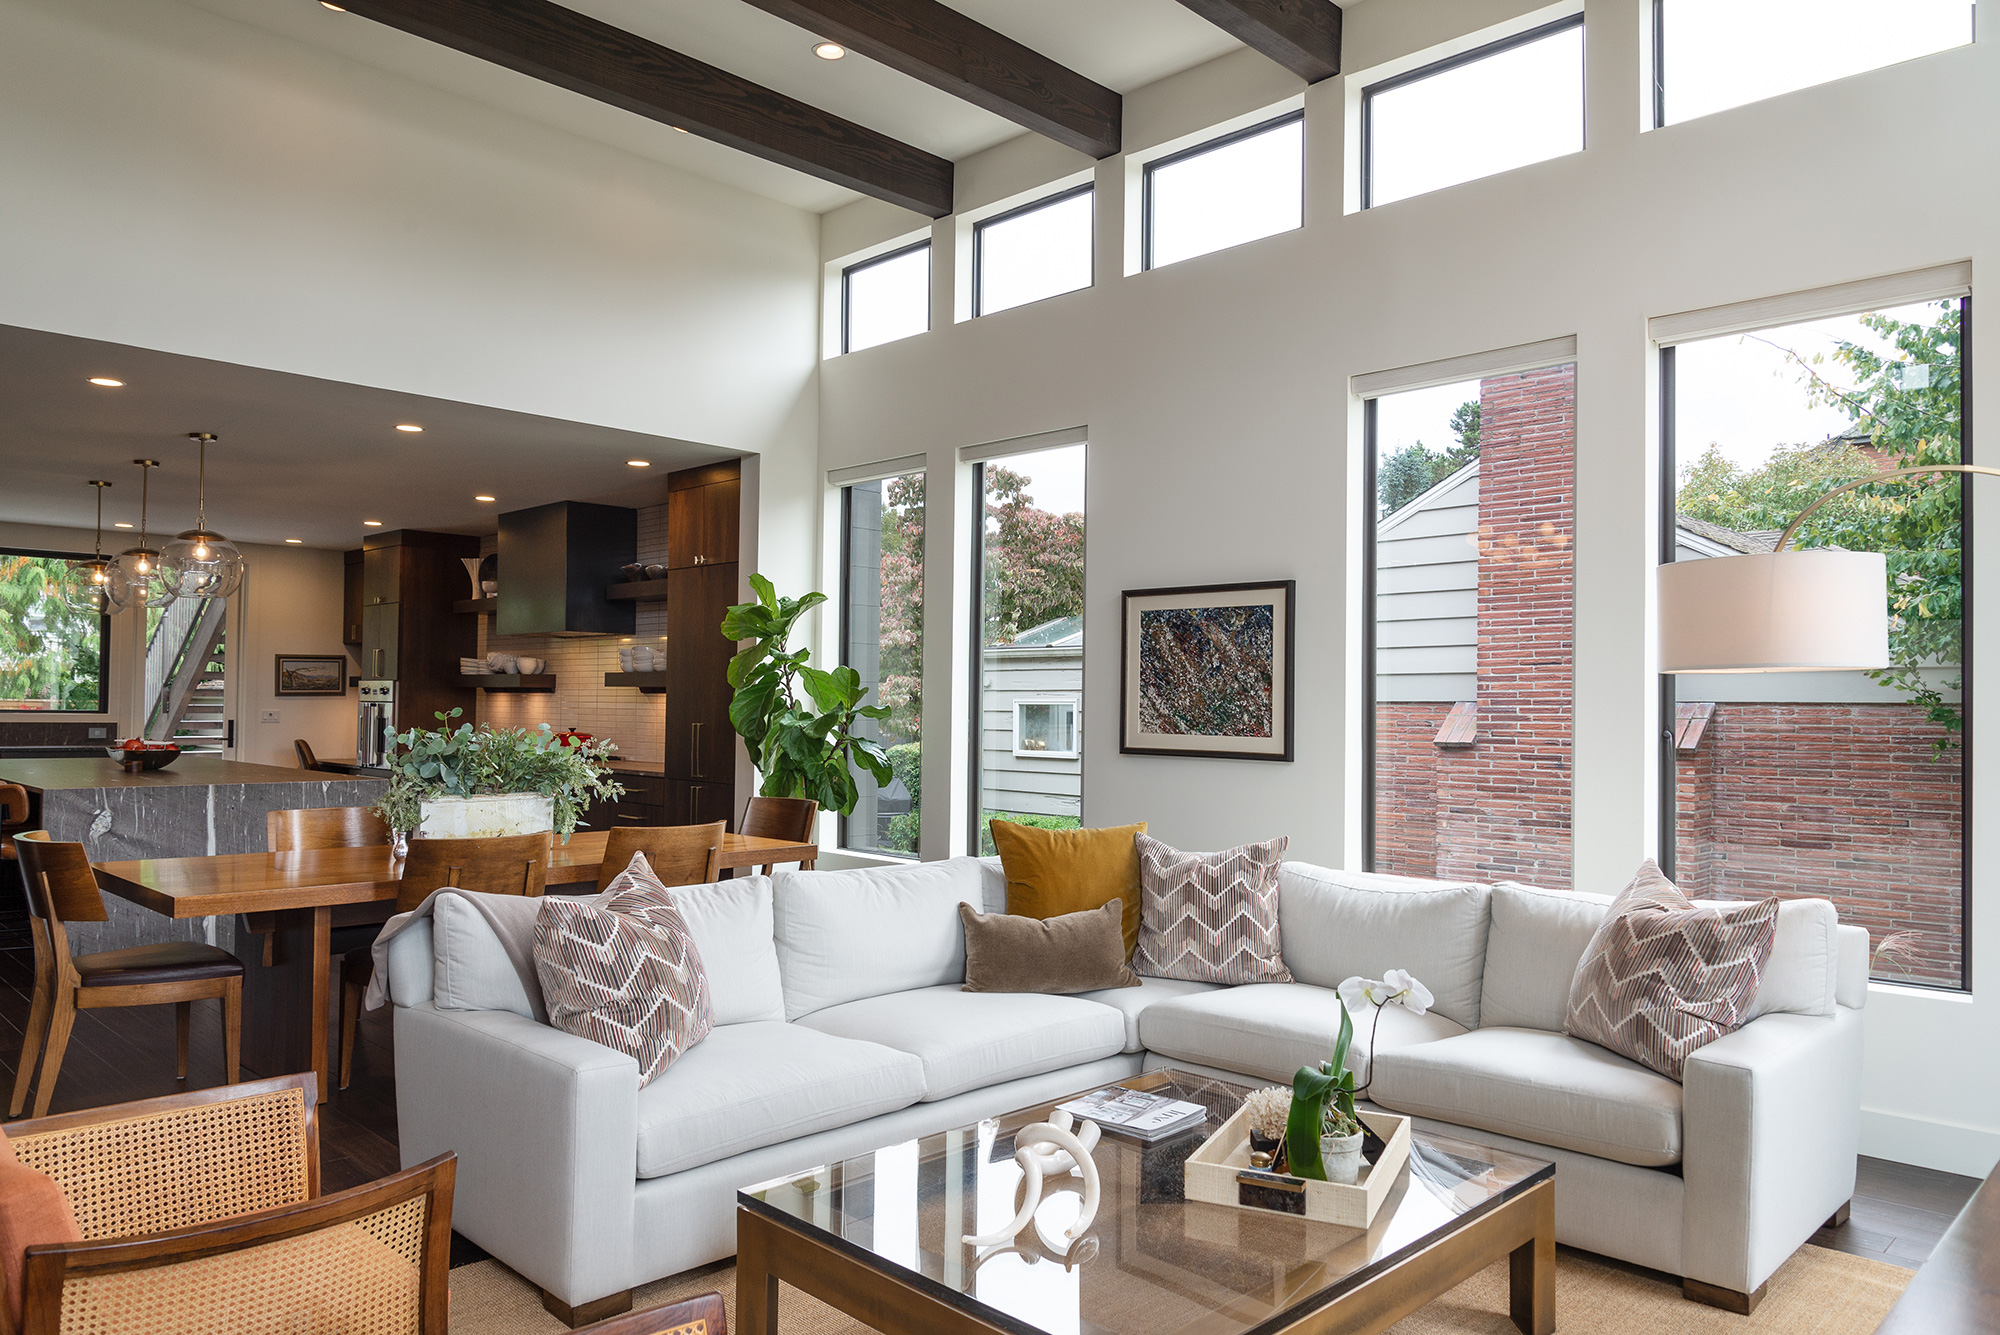 Spacious living room with high ceilings